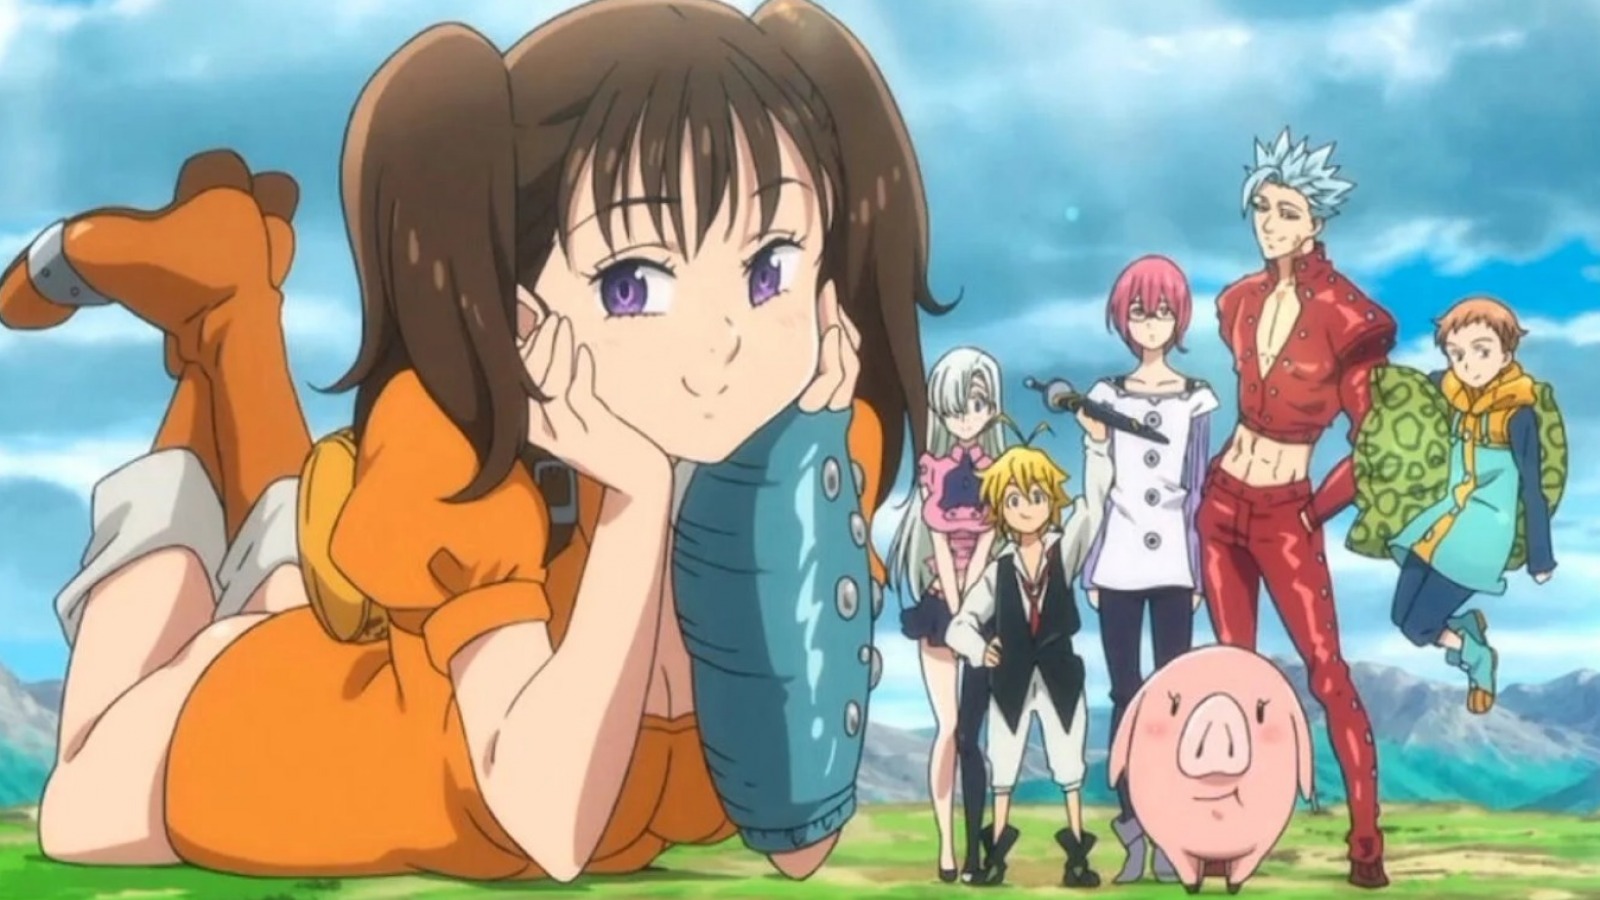 The Most Powerful Member Of The Seven Deadly Sins Isn't Who You Think